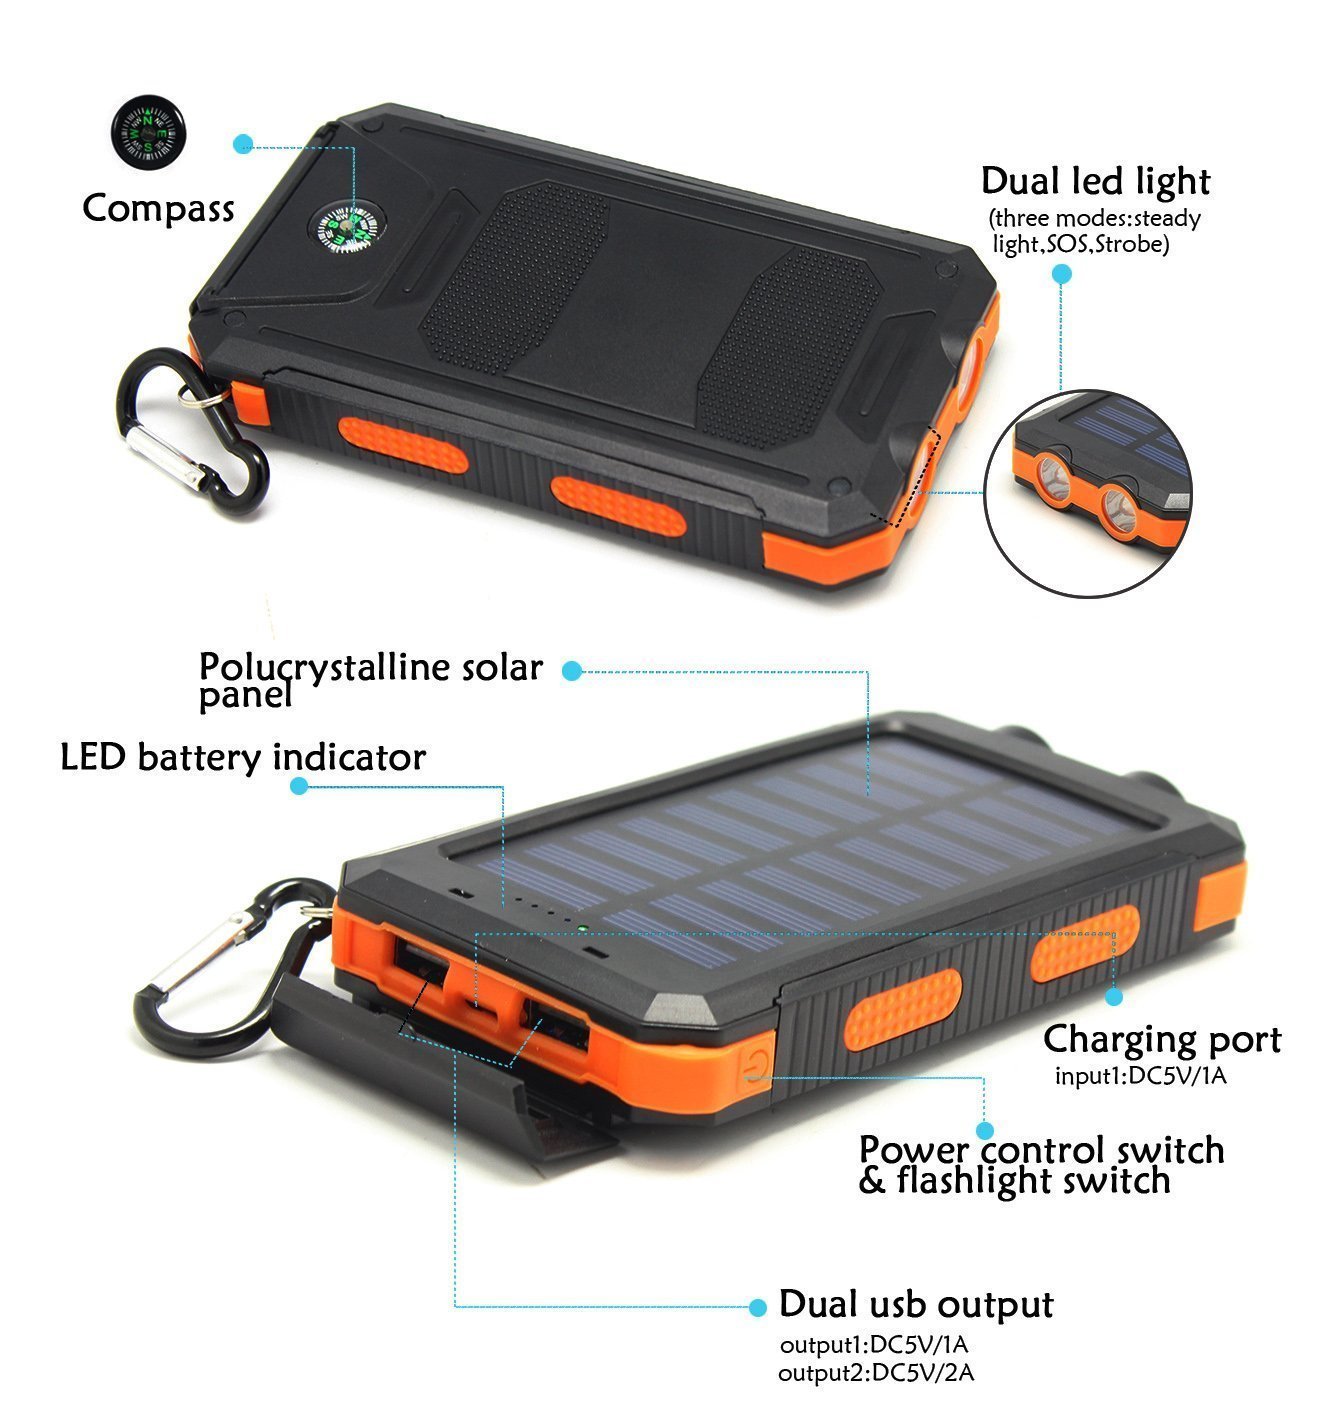 Solar Charger,F.DORLA 20000mAh Portable Outdoor Waterproof Mobile Power Bank,Camping External Backup Battery Pack Dual USB 5V 1A/2A Output 2 Led Light Flashlight with Compass for Tablet iPhone Android 